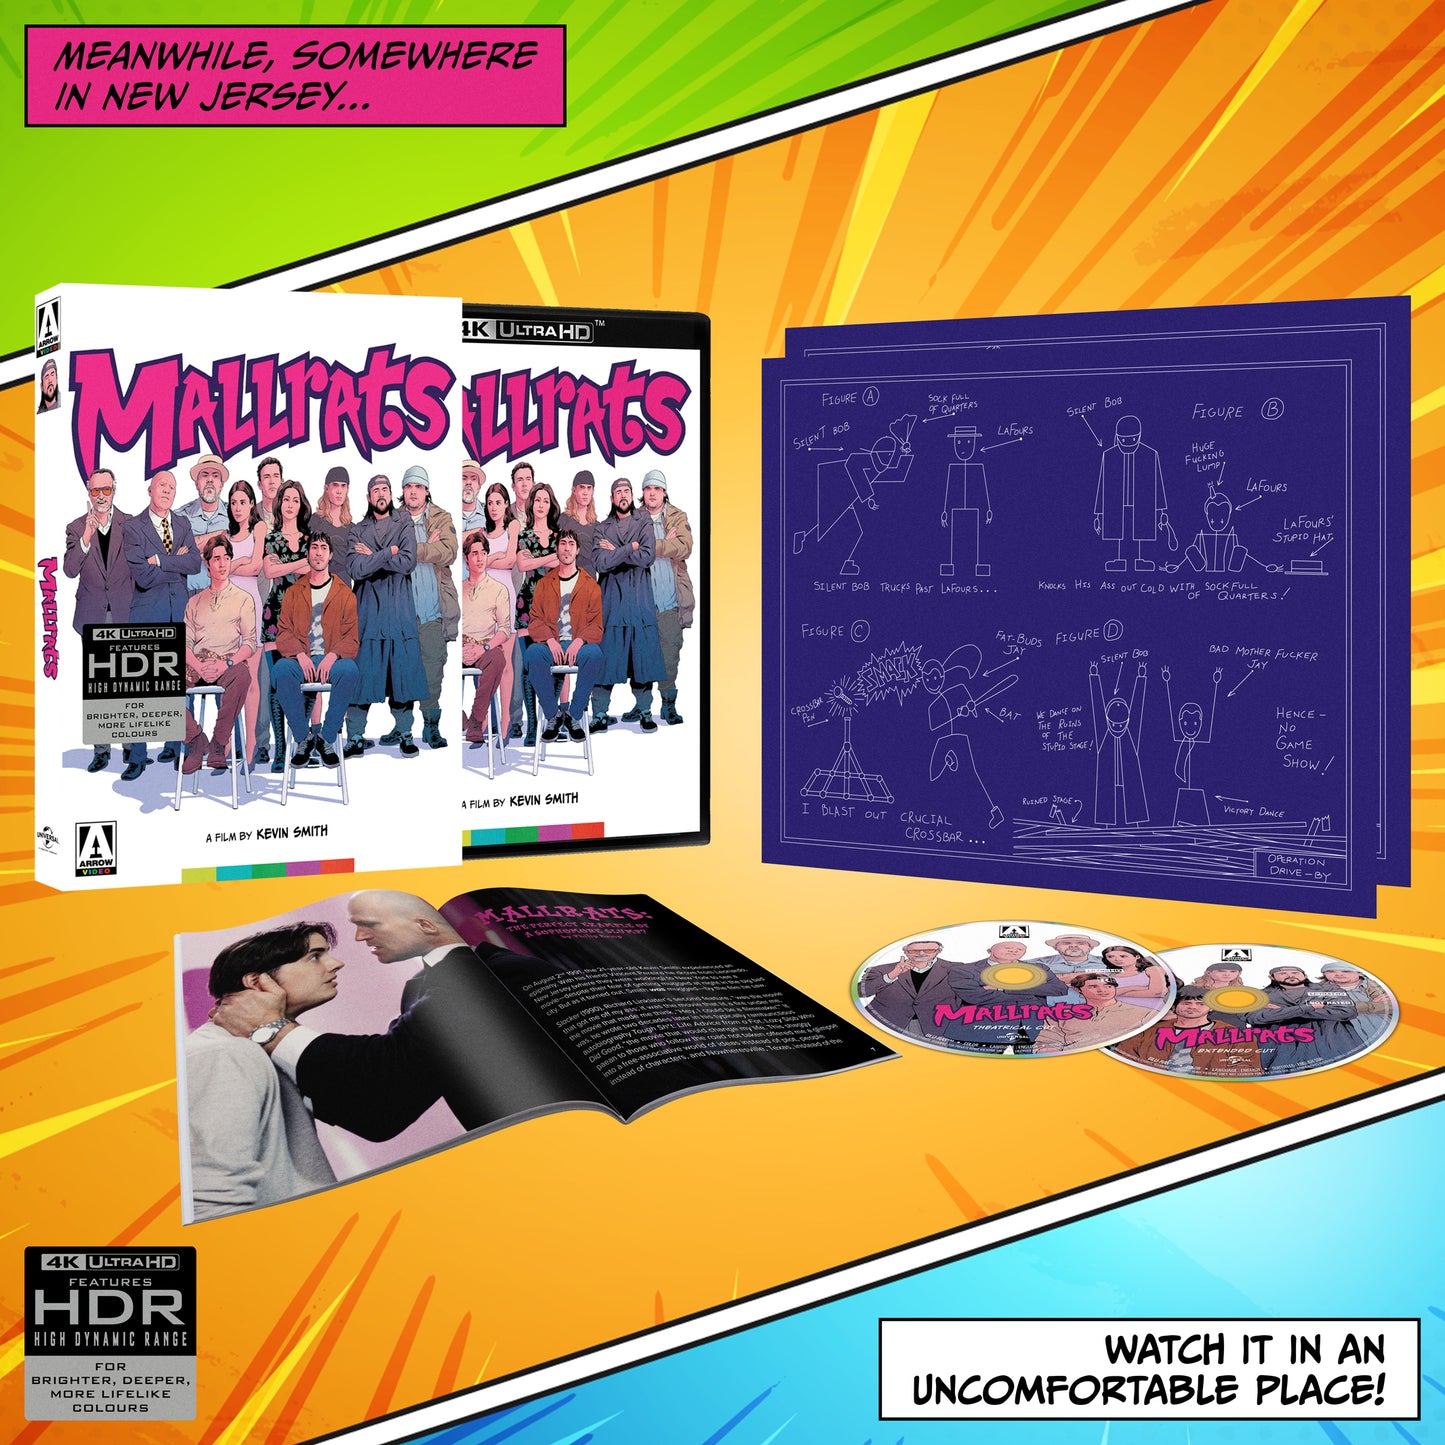 Mallrats Limited Edition 4K UHD with Slipcover (Arrow Video U.S.)